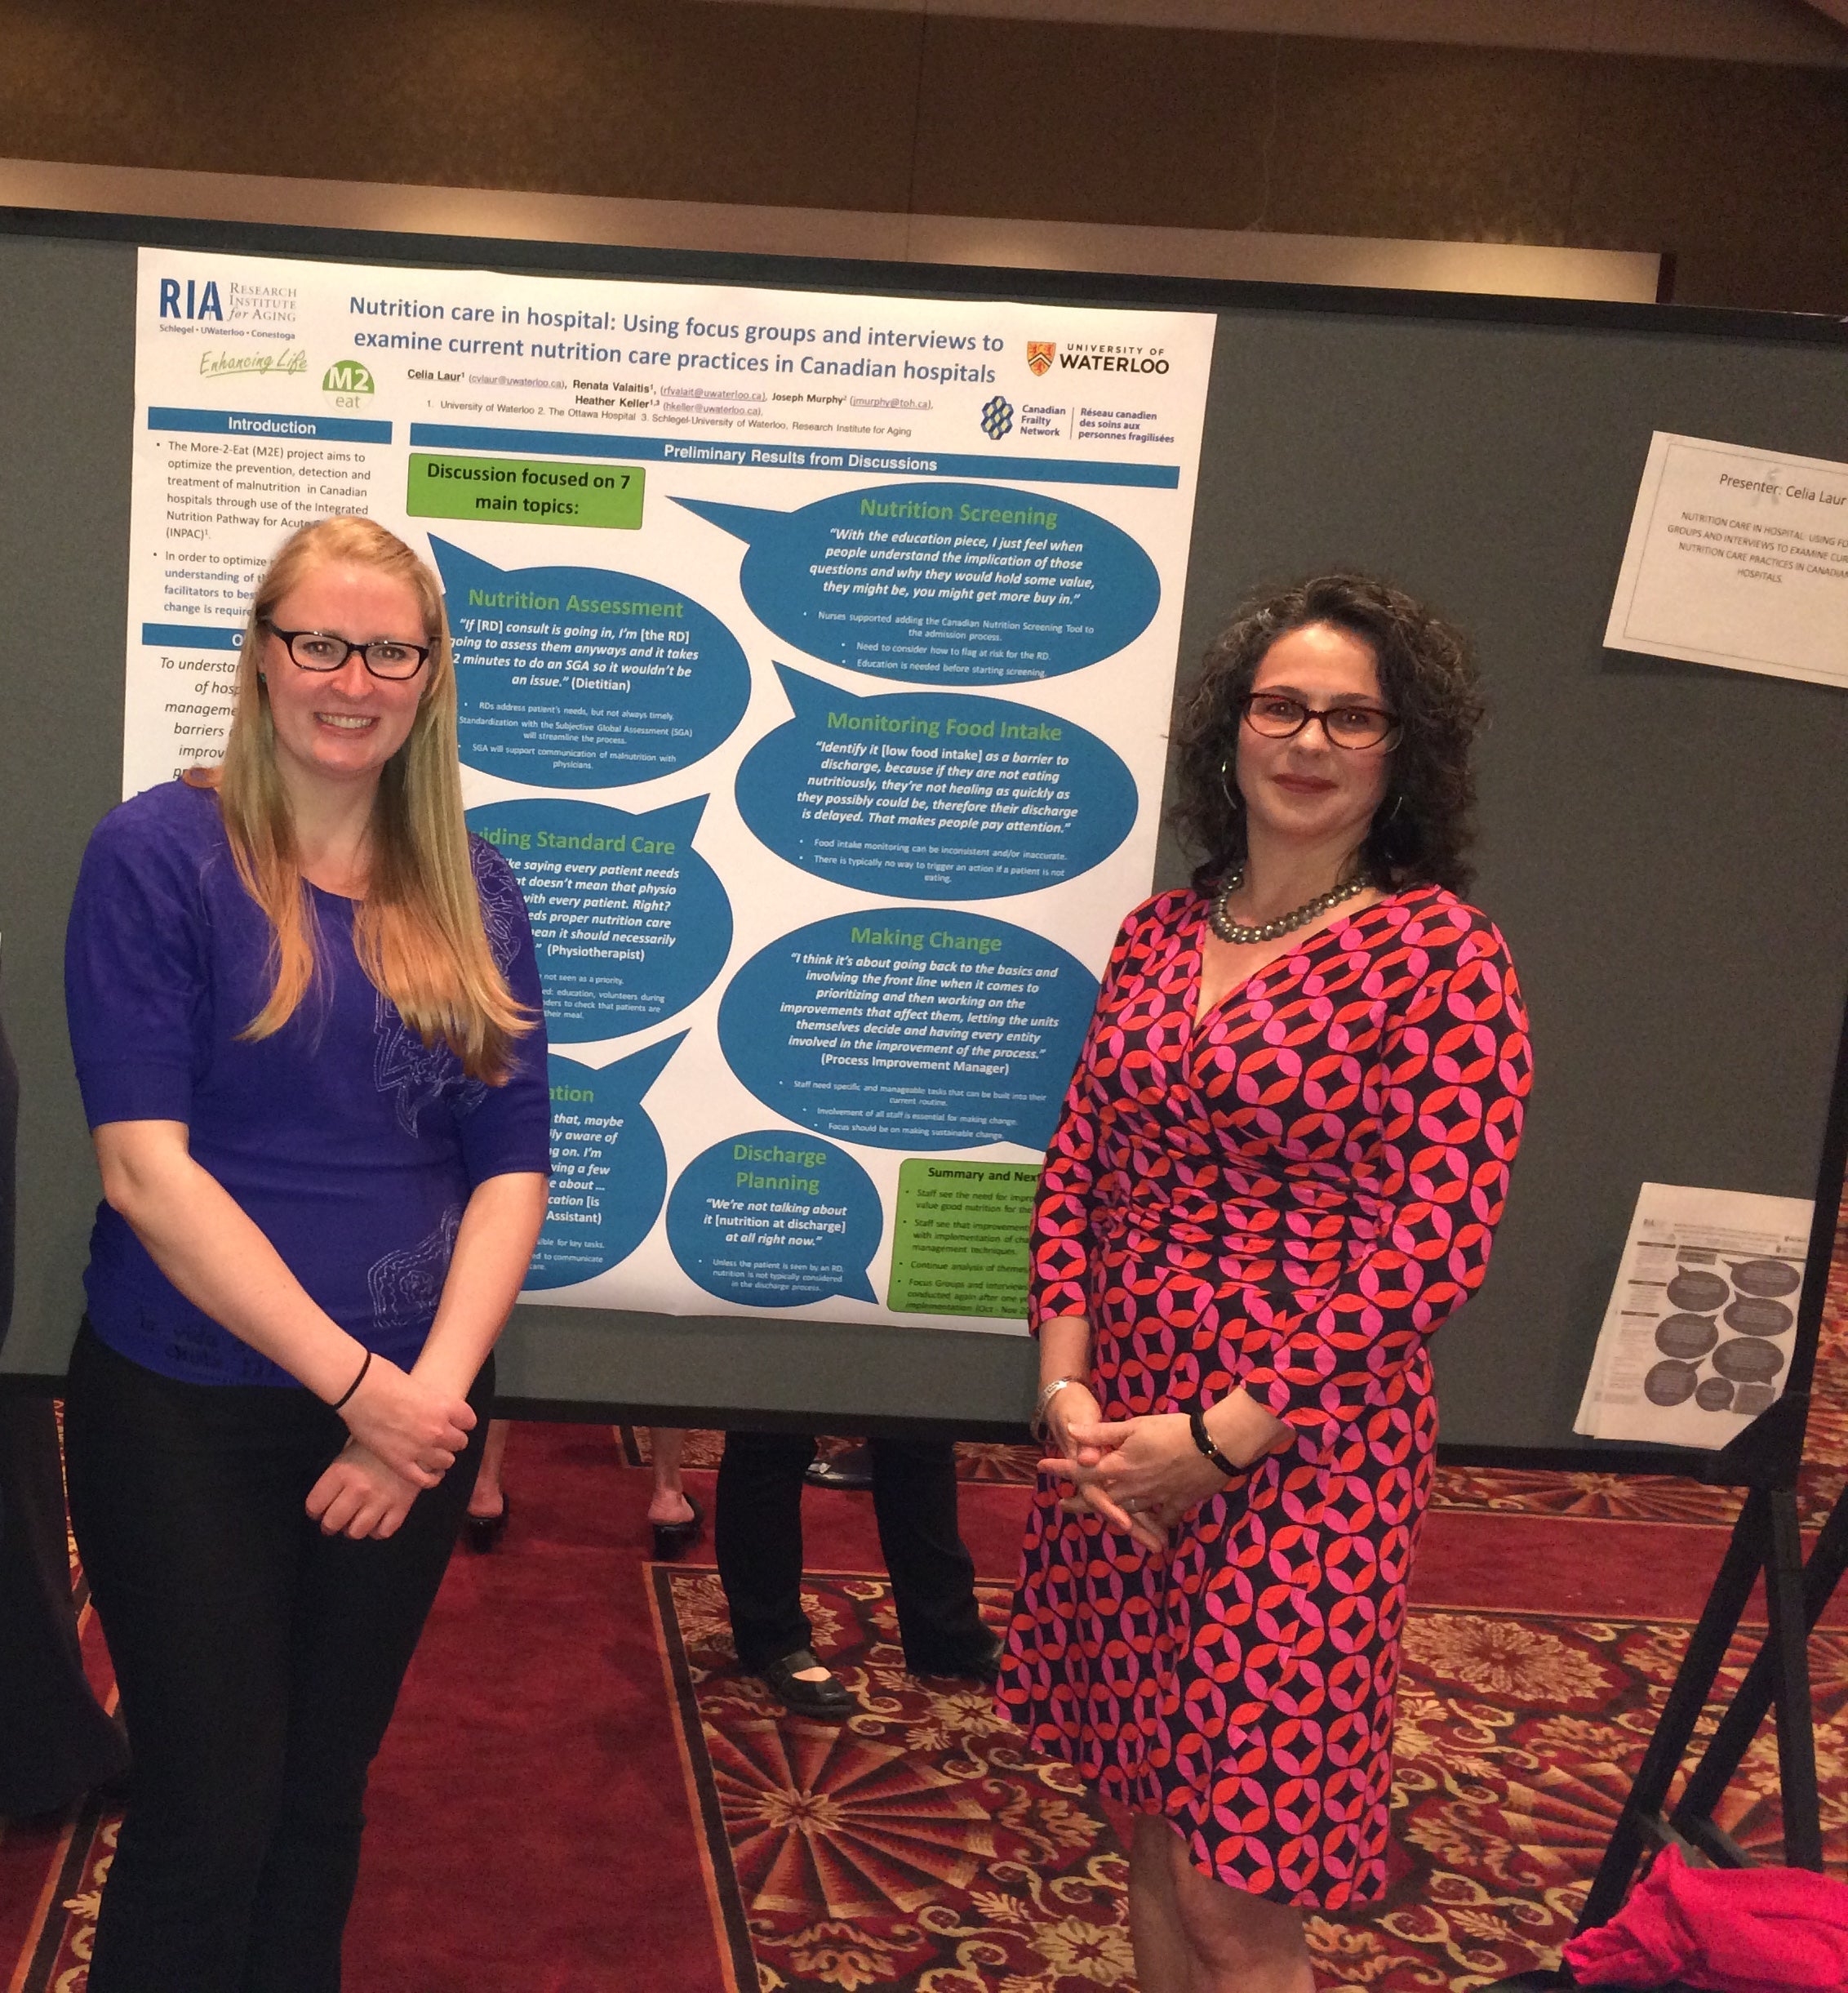 Celia and Heather with conference poster